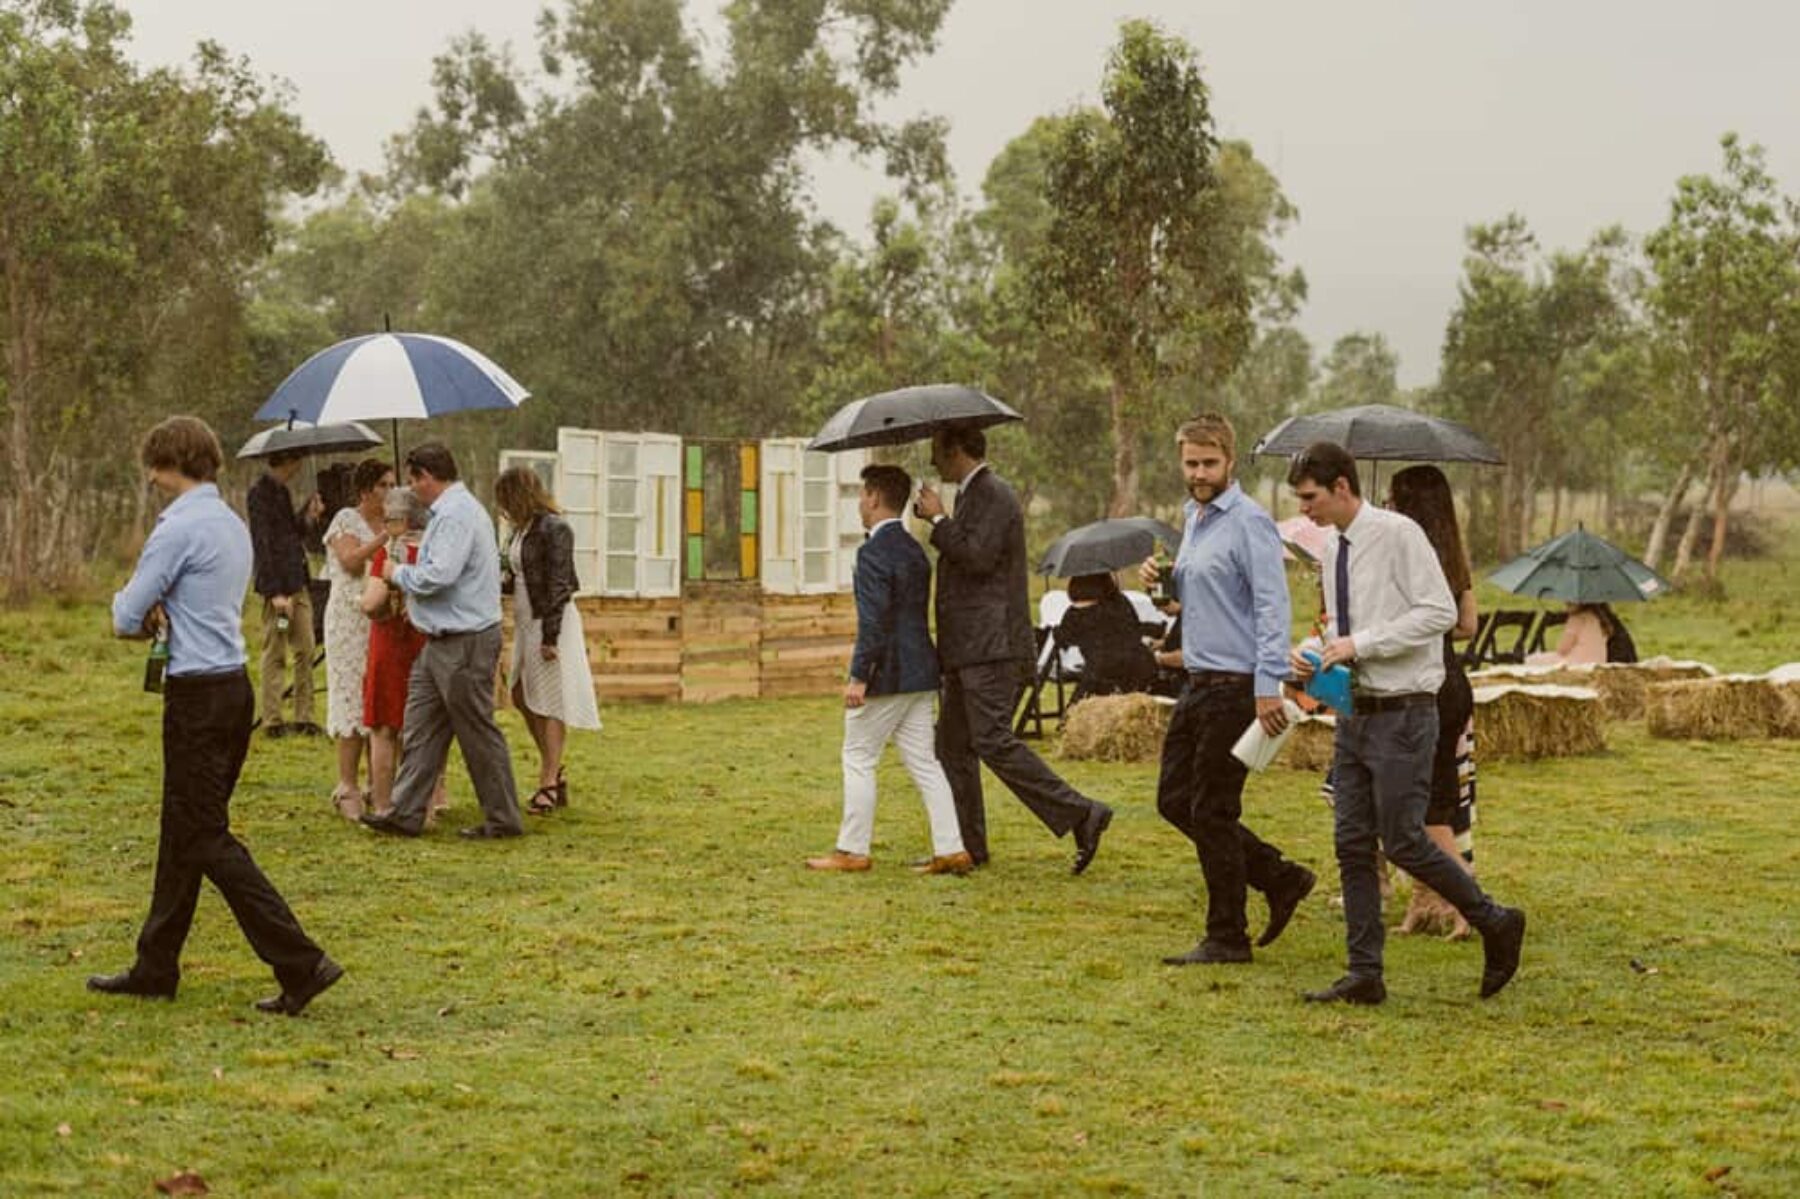 rainy country wedding - photography by Todd Hunter McGaw